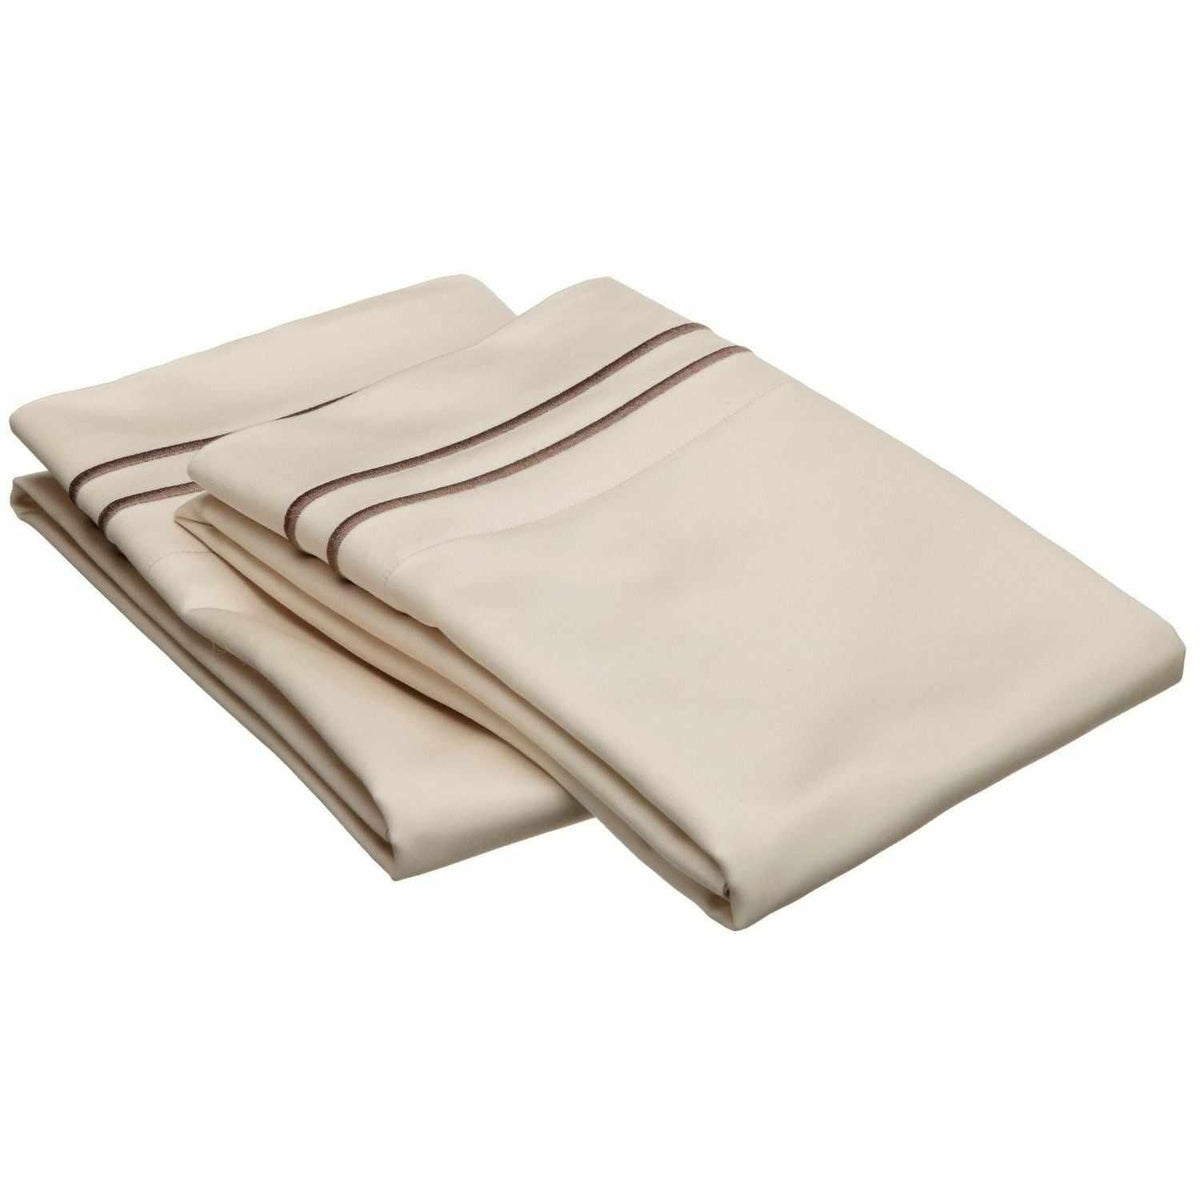 2 Embroidered Line Egyptian Cotton 2-Piece Pillowcase Set - Ivory/Taupe